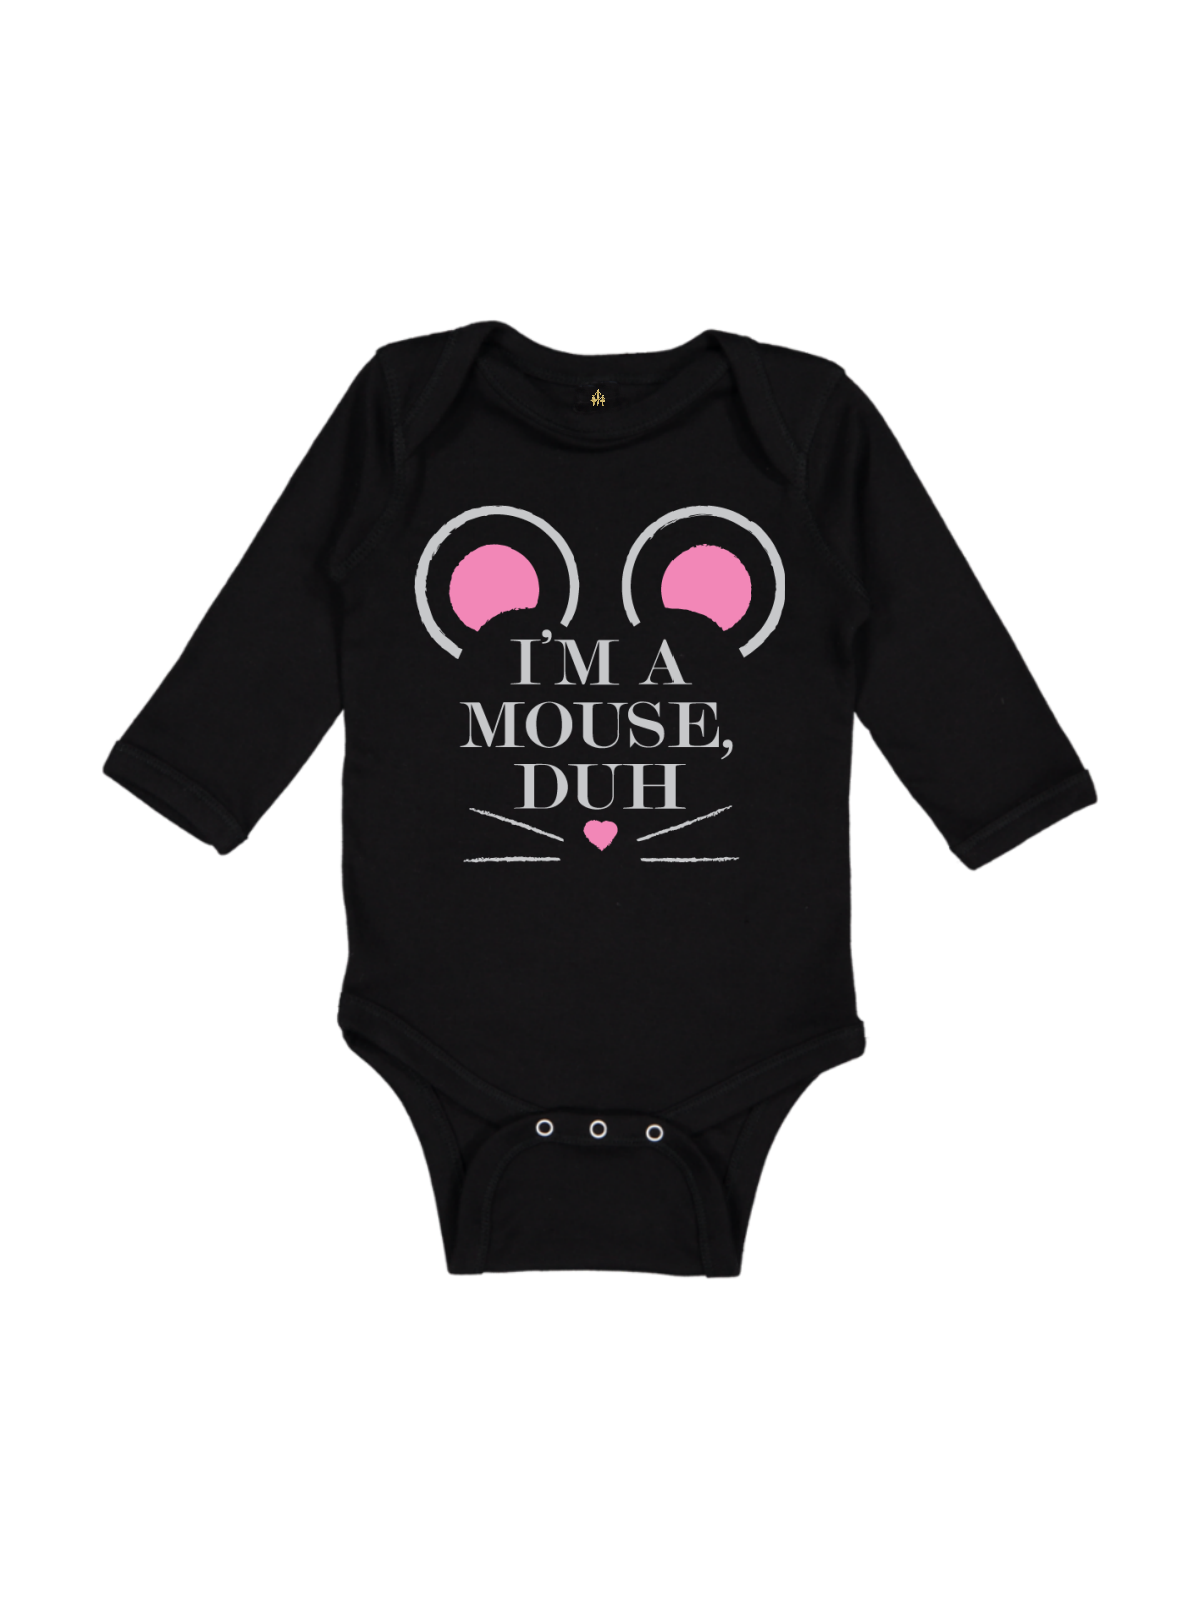 im a mouse duh baby bodysuits